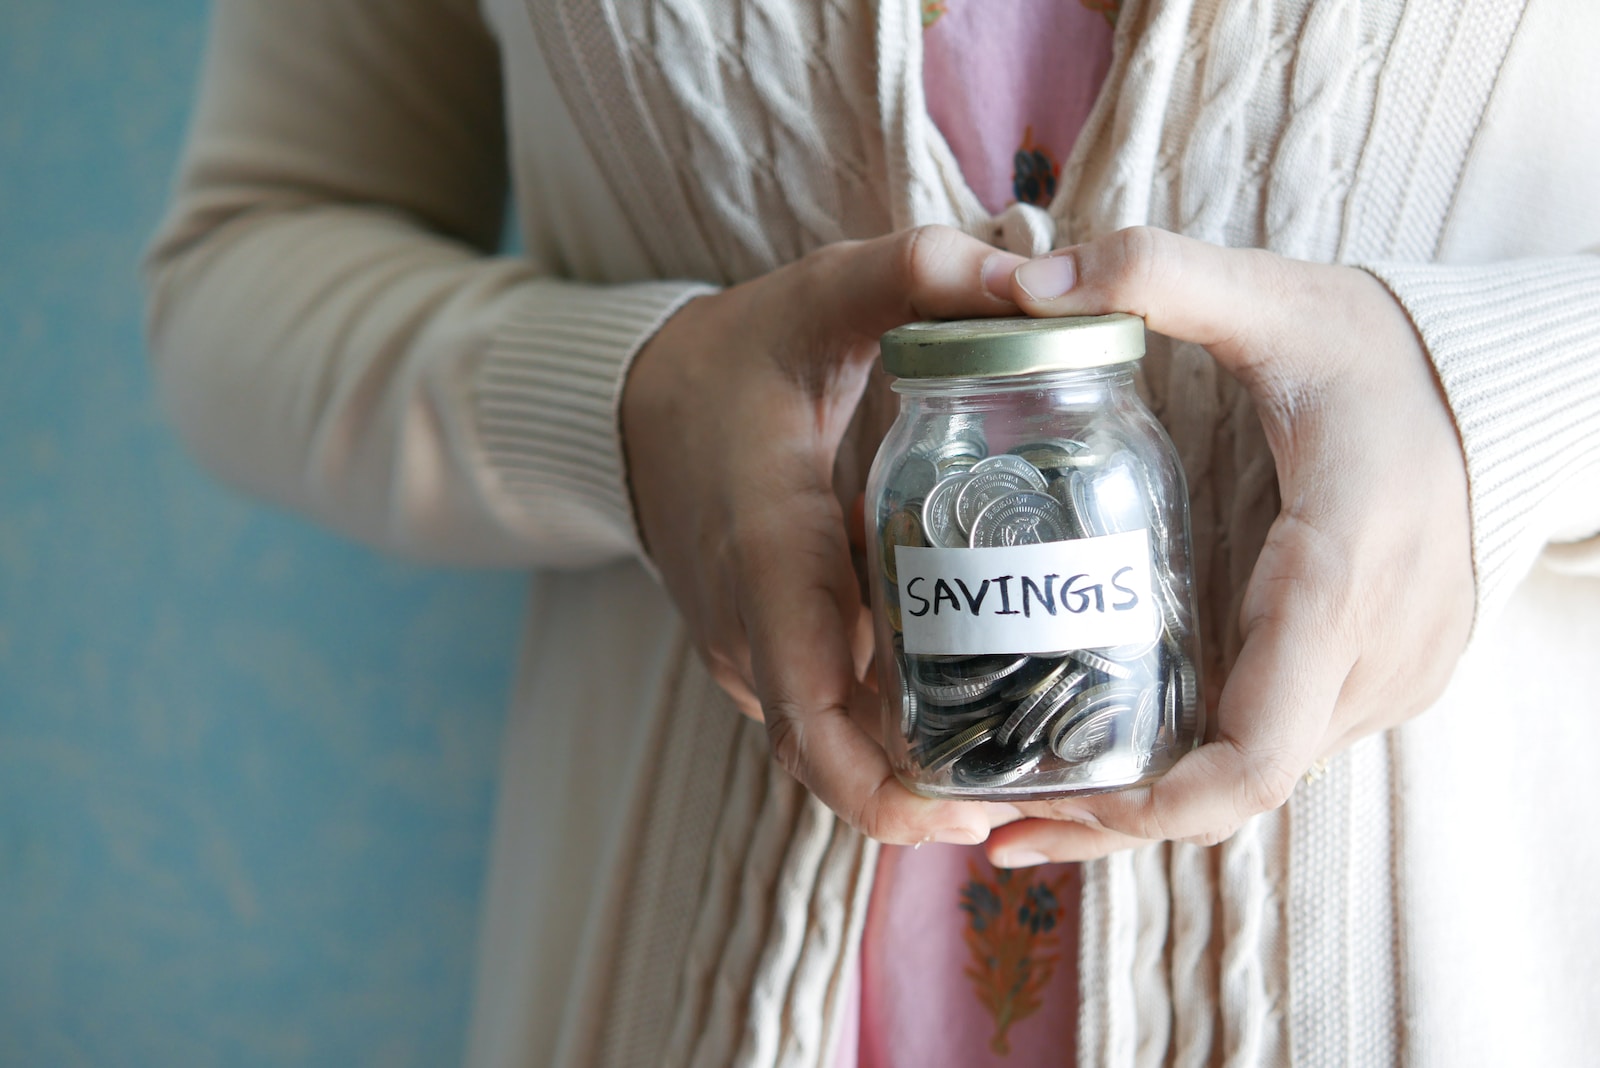 a woman holding a jar with savings written on it persistent consumer proxy